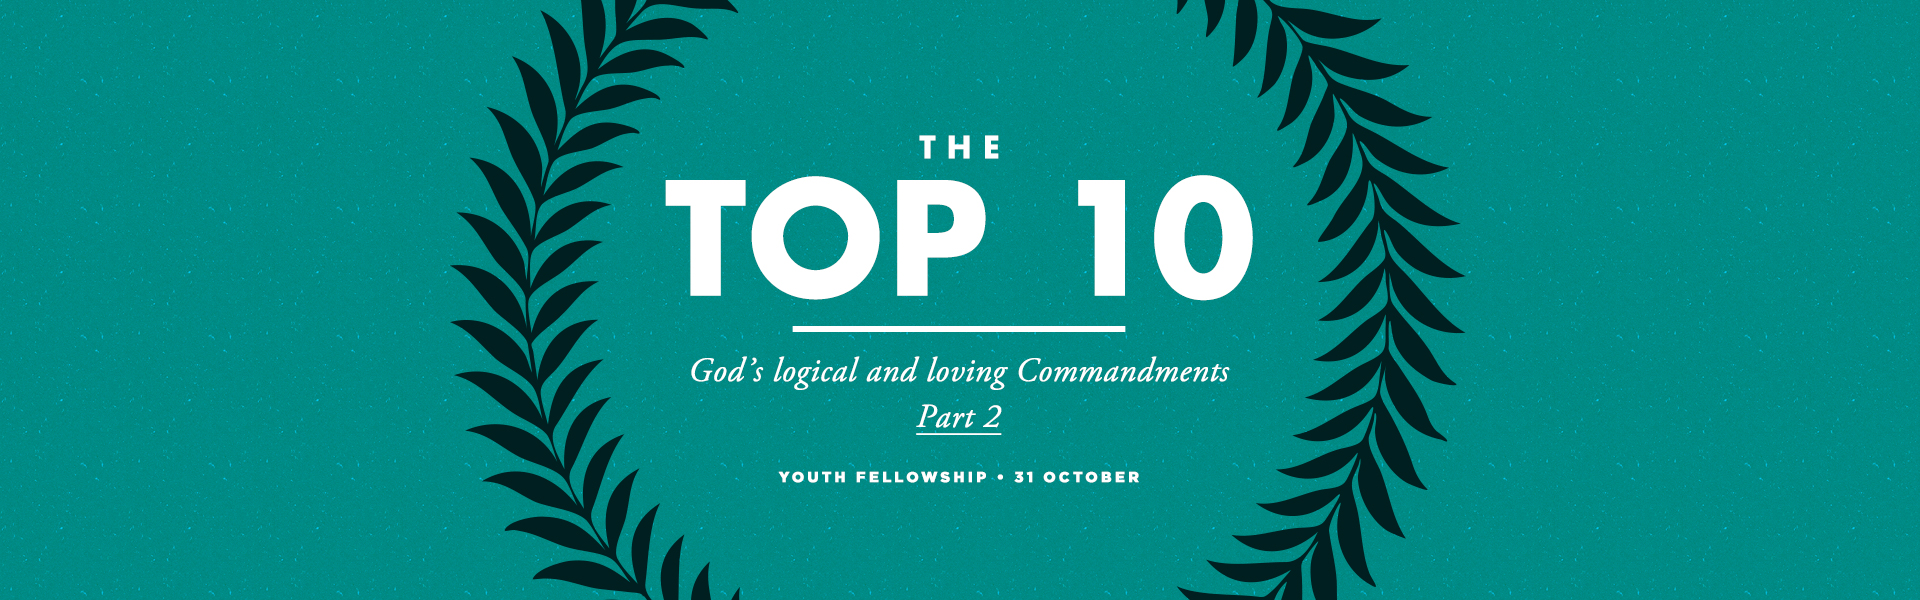 The Top 10 God’s logical and loving Commandments Part 2